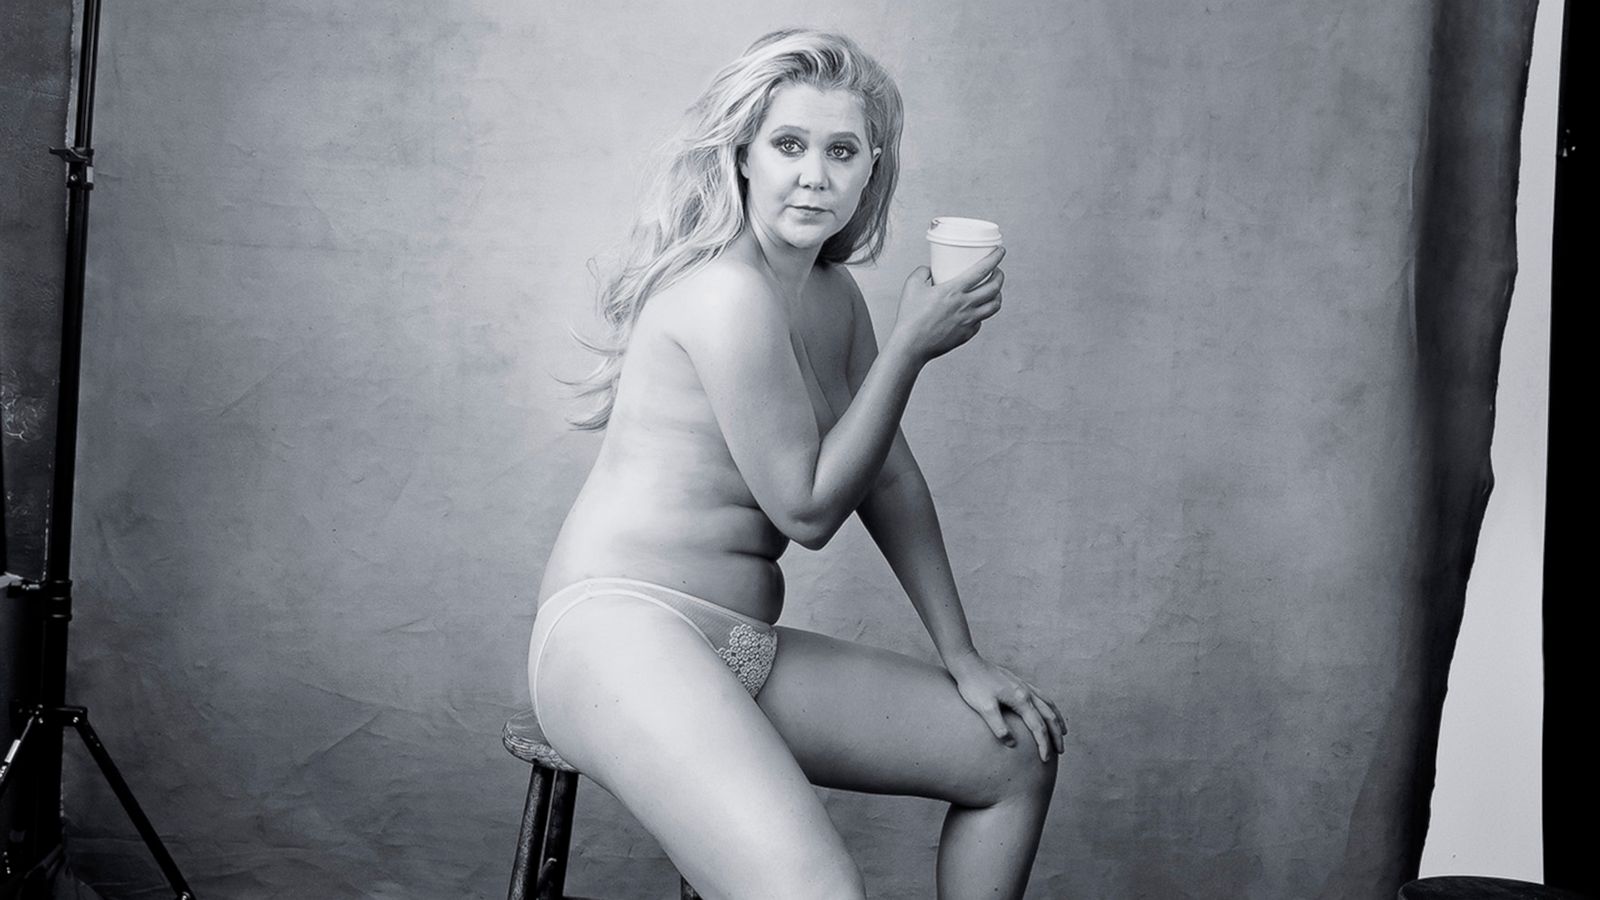 Schumer hot amy pics of Amy Schumer